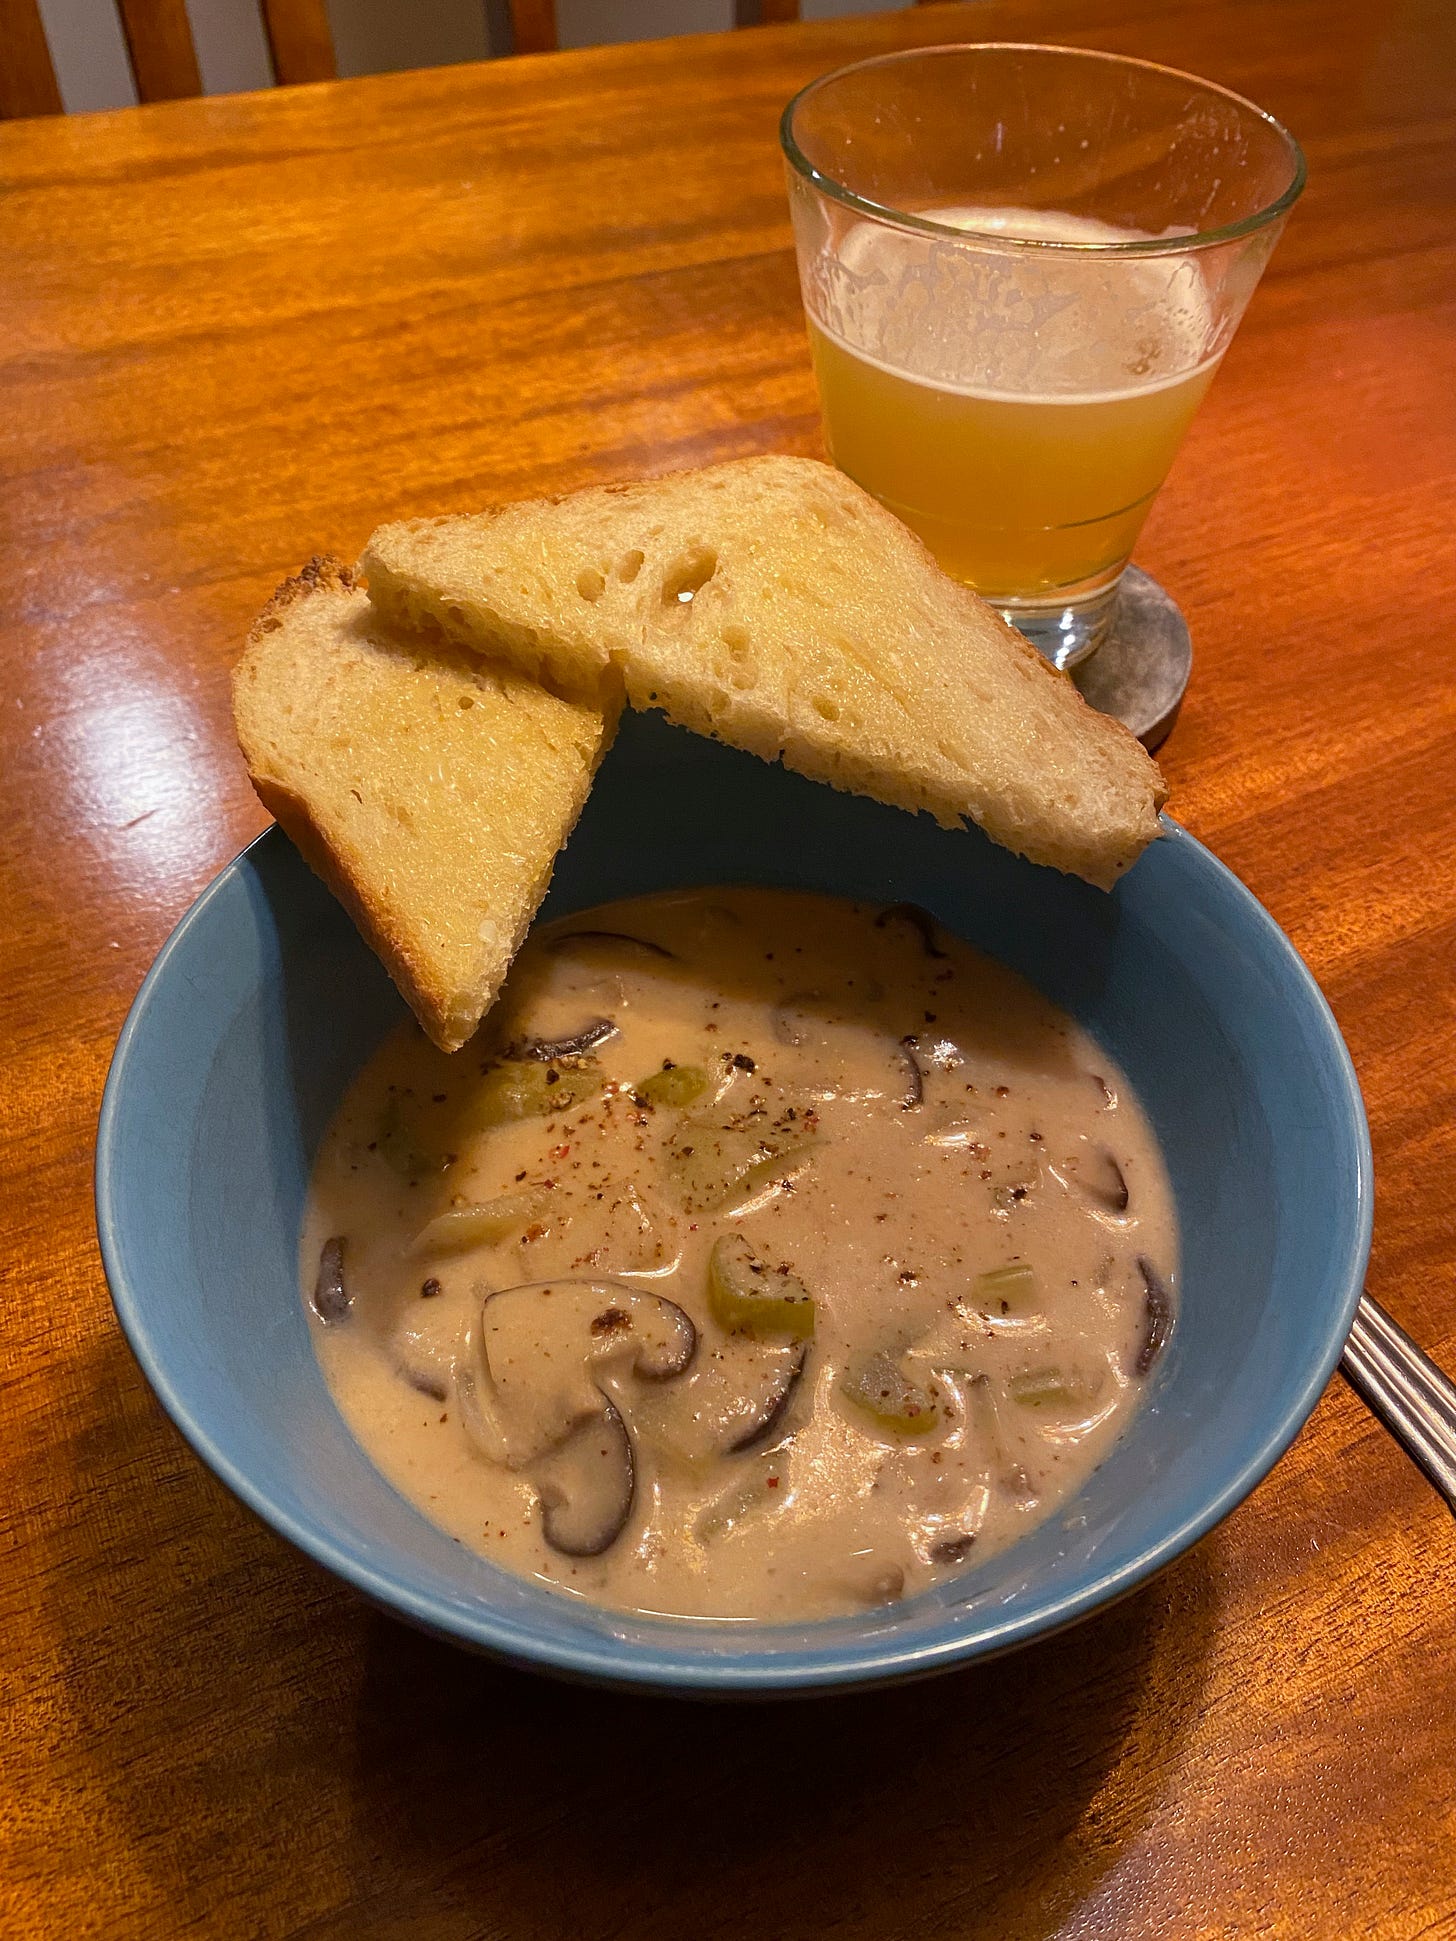 A blue bowl with vegan chowder, full of shiitake mushrooms, celery, and potatoes in a creamy base. Two triangles of toast rest on the side of the plate. A glass of IPA is on a coaster beside it.